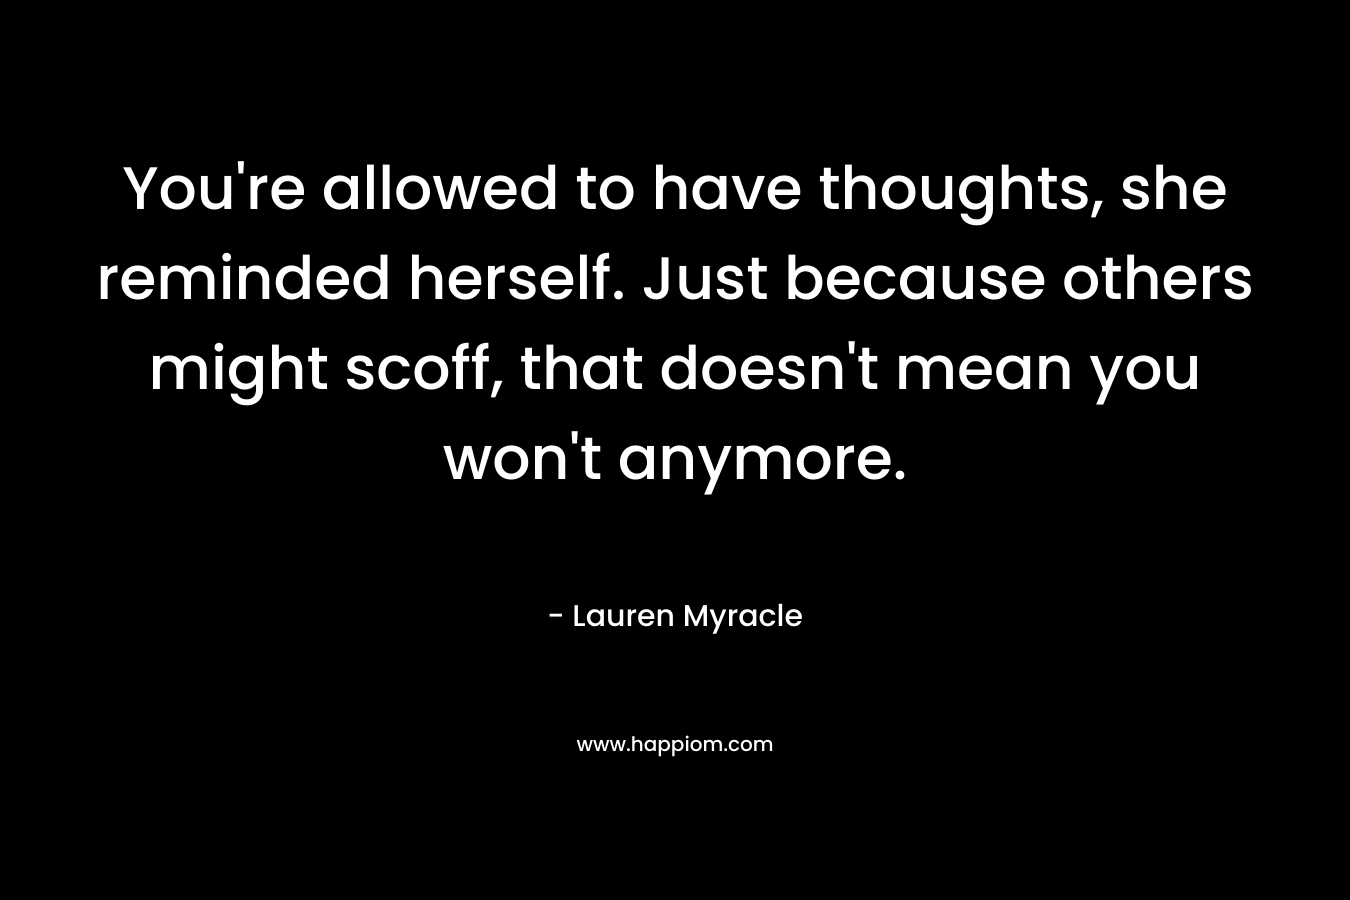 You’re allowed to have thoughts, she reminded herself. Just because others might scoff, that doesn’t mean you won’t anymore. – Lauren Myracle